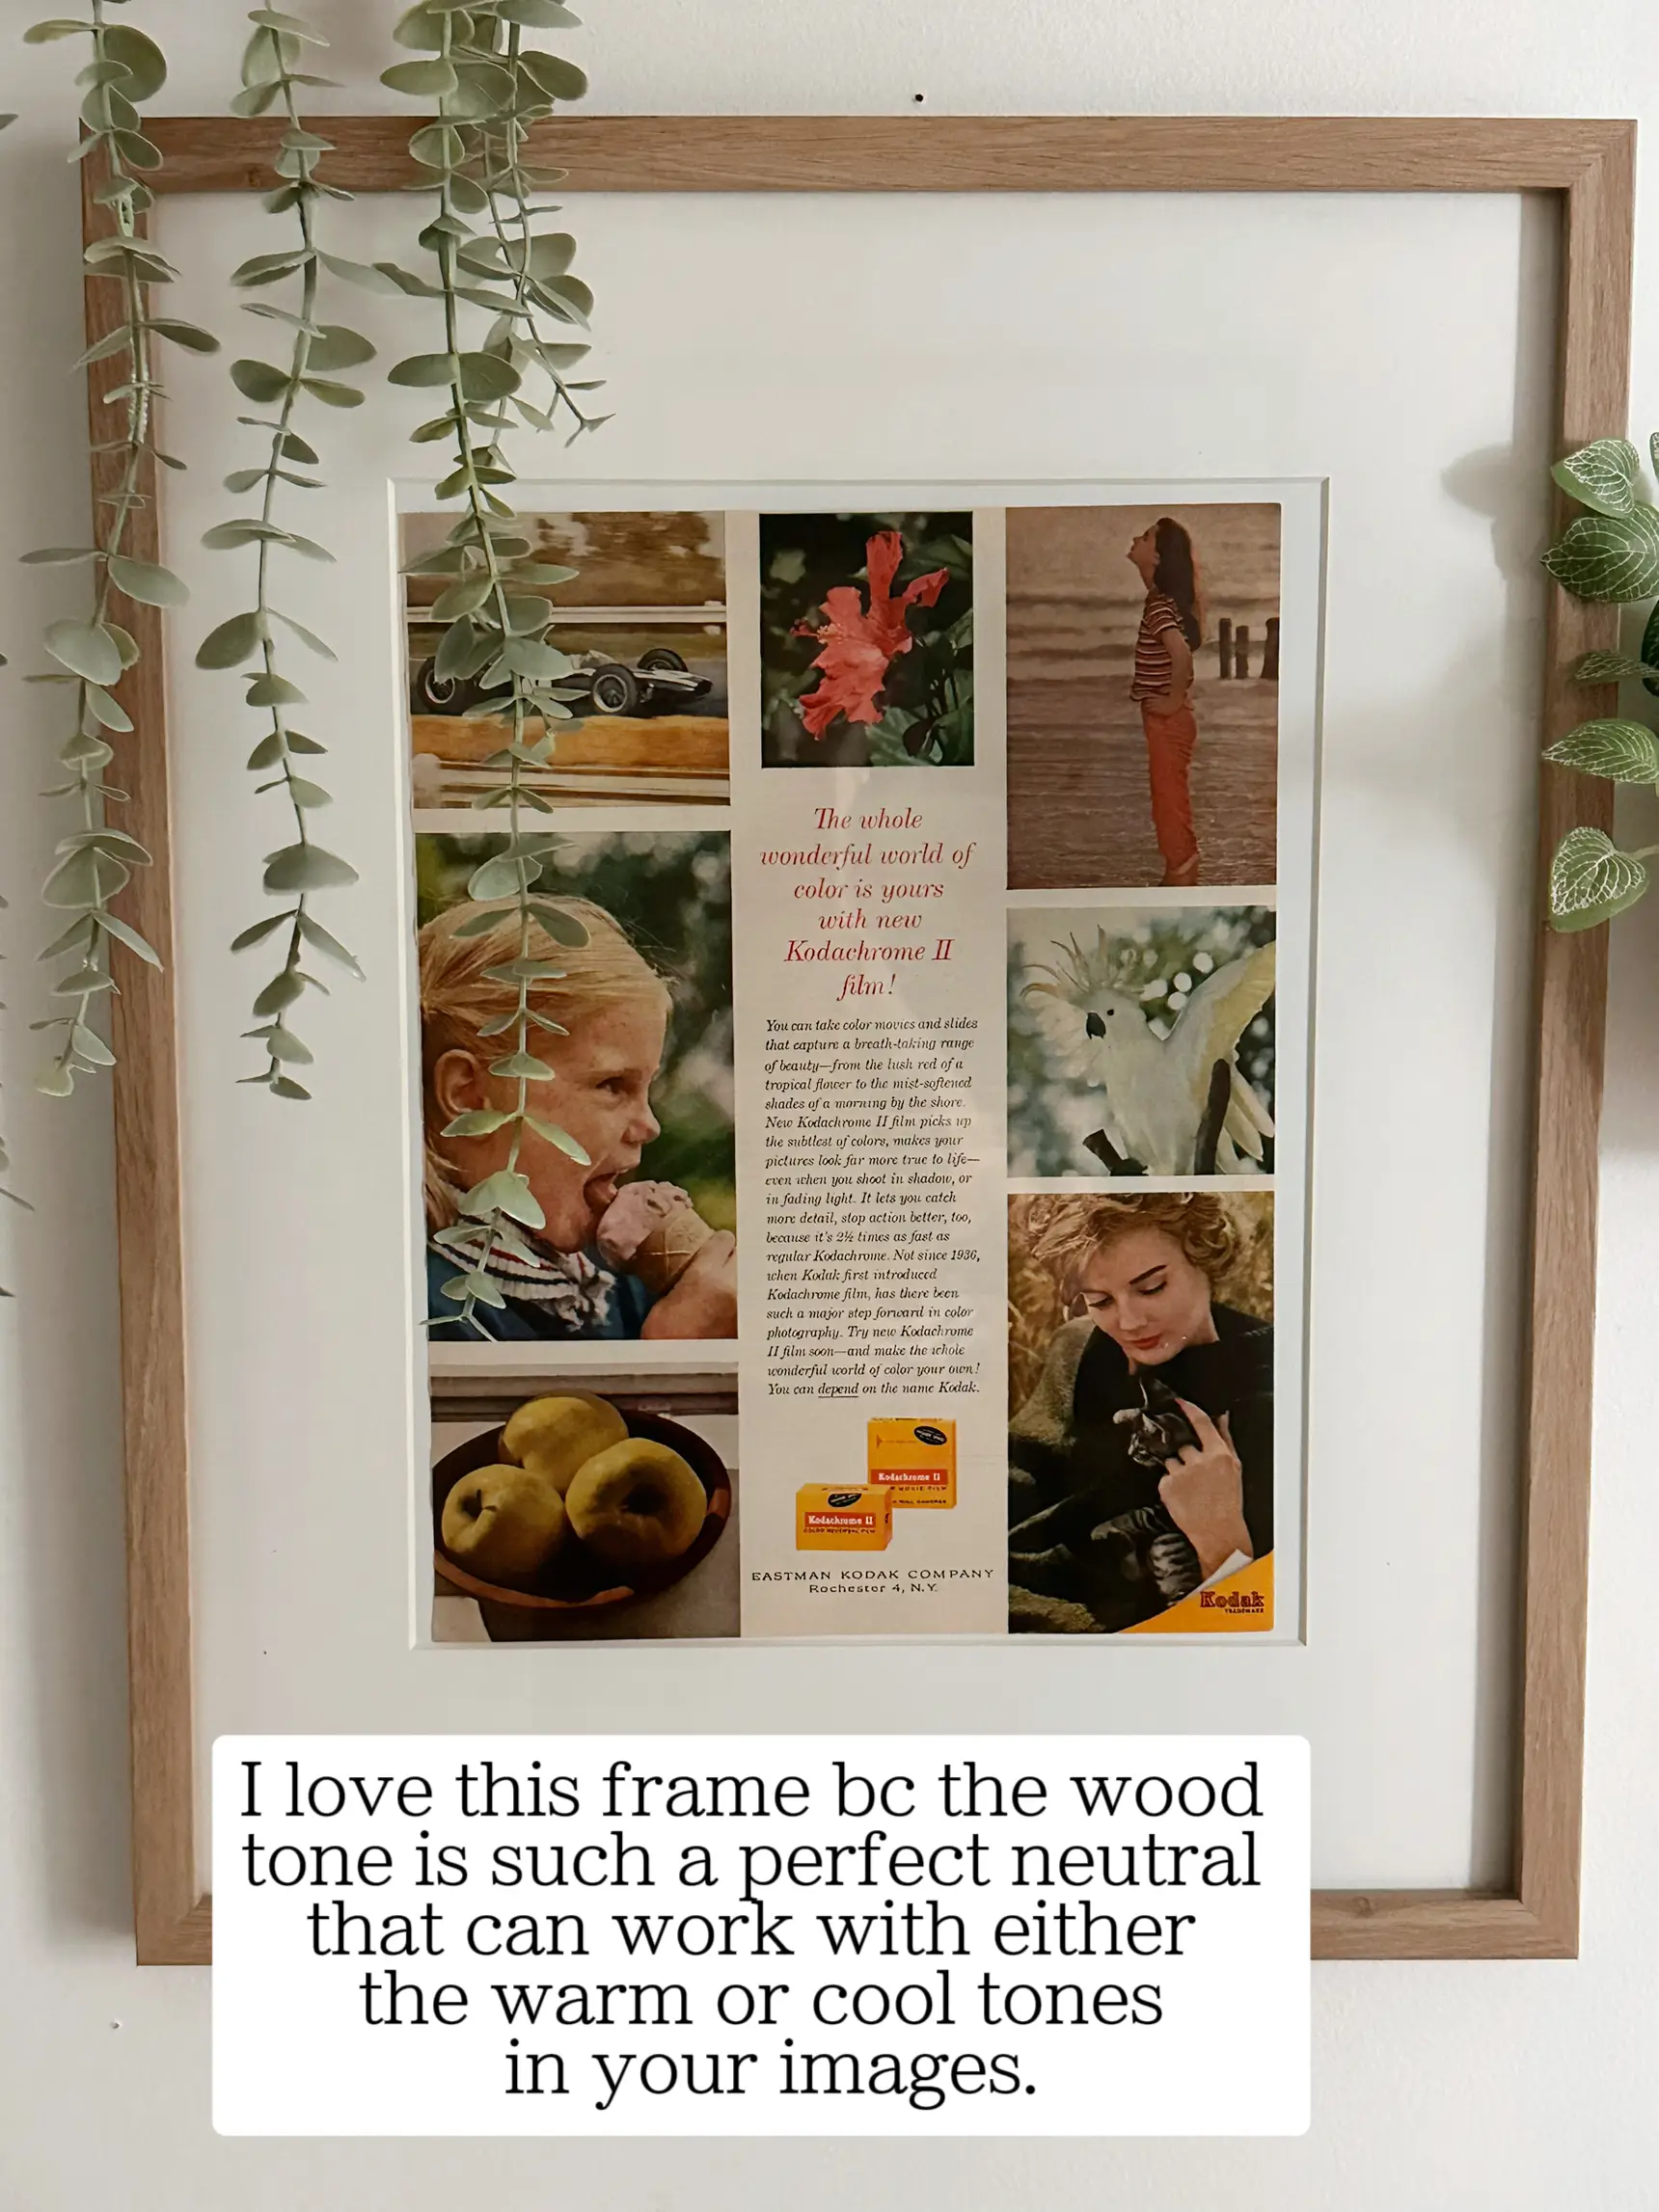 Photo Frame Ideas: Unique Things to Frame for Business